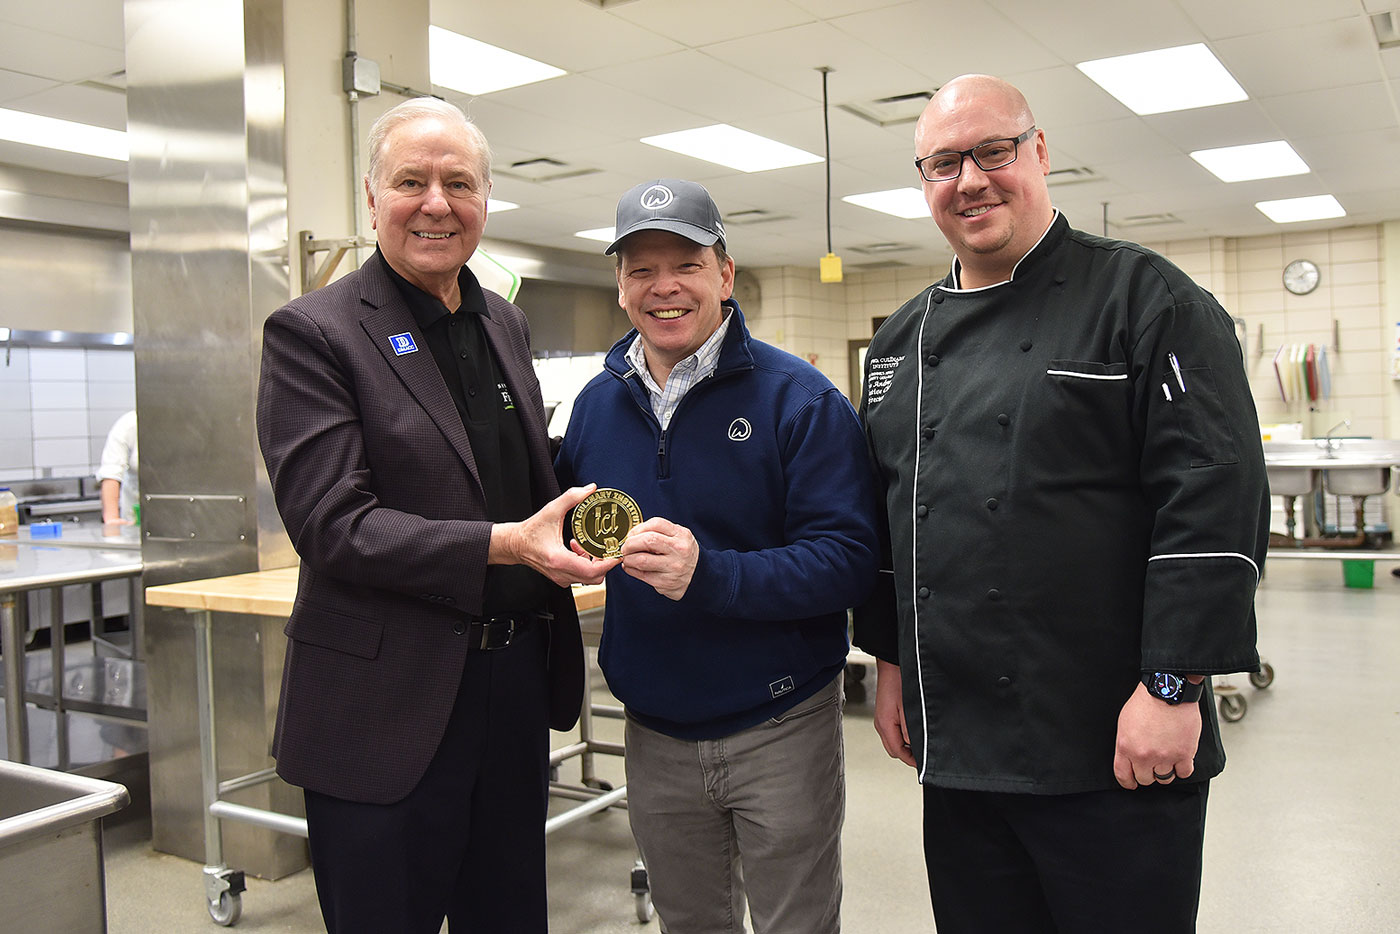 Celebrity Chef Paul Wahlberg Visits the Iowa Culinary Institute (ici®) at DMACC